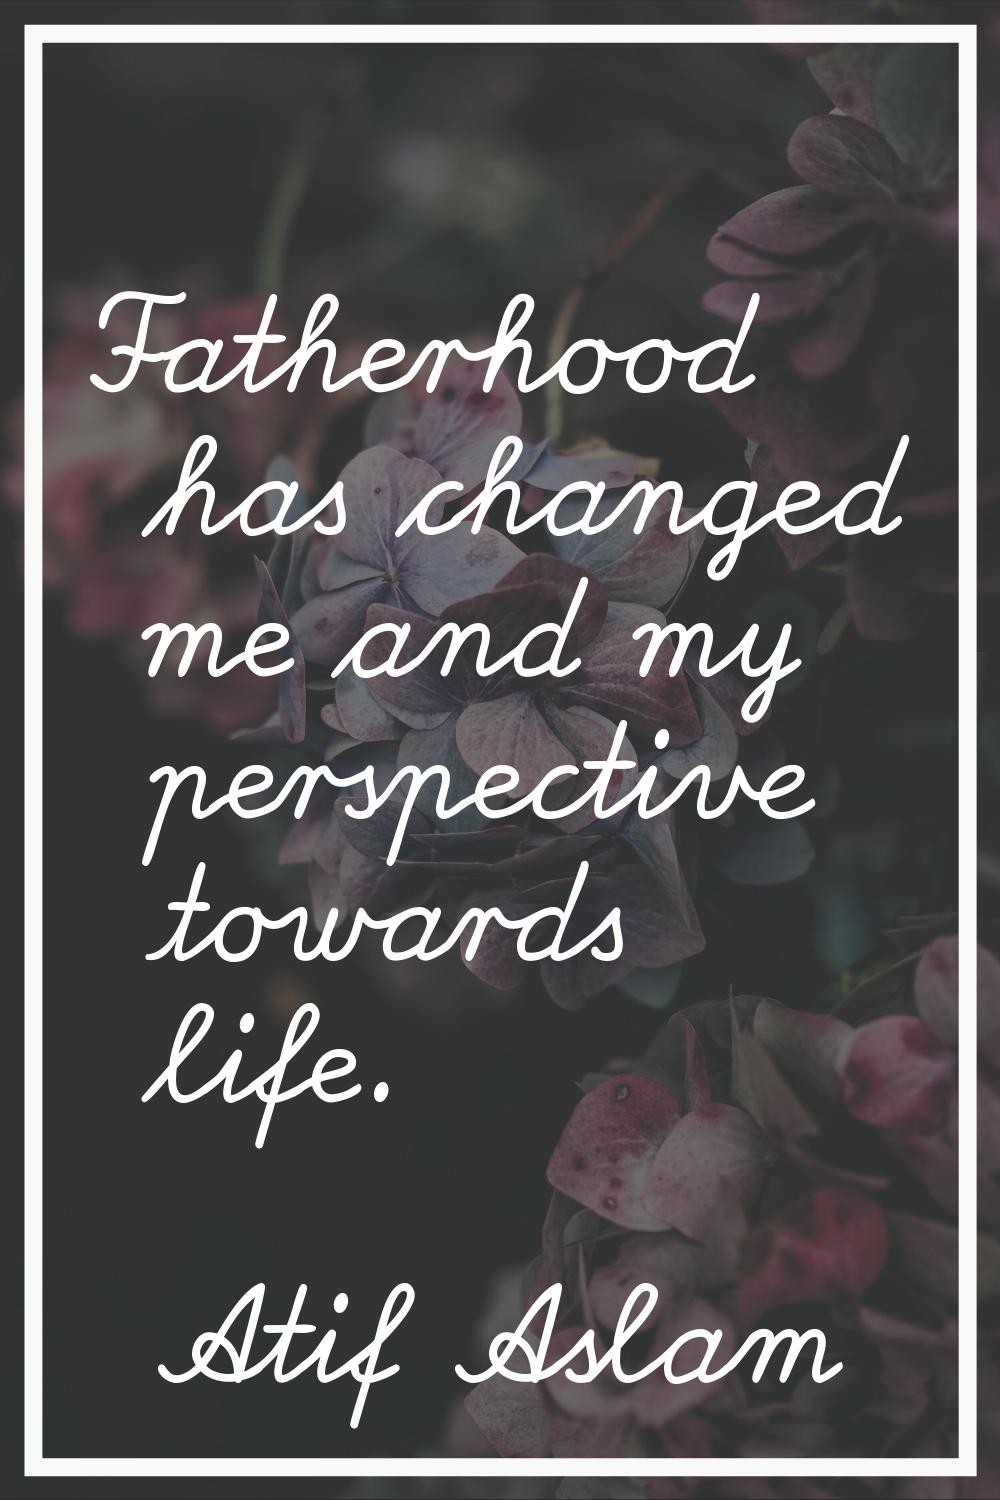 Fatherhood has changed me and my perspective towards life.